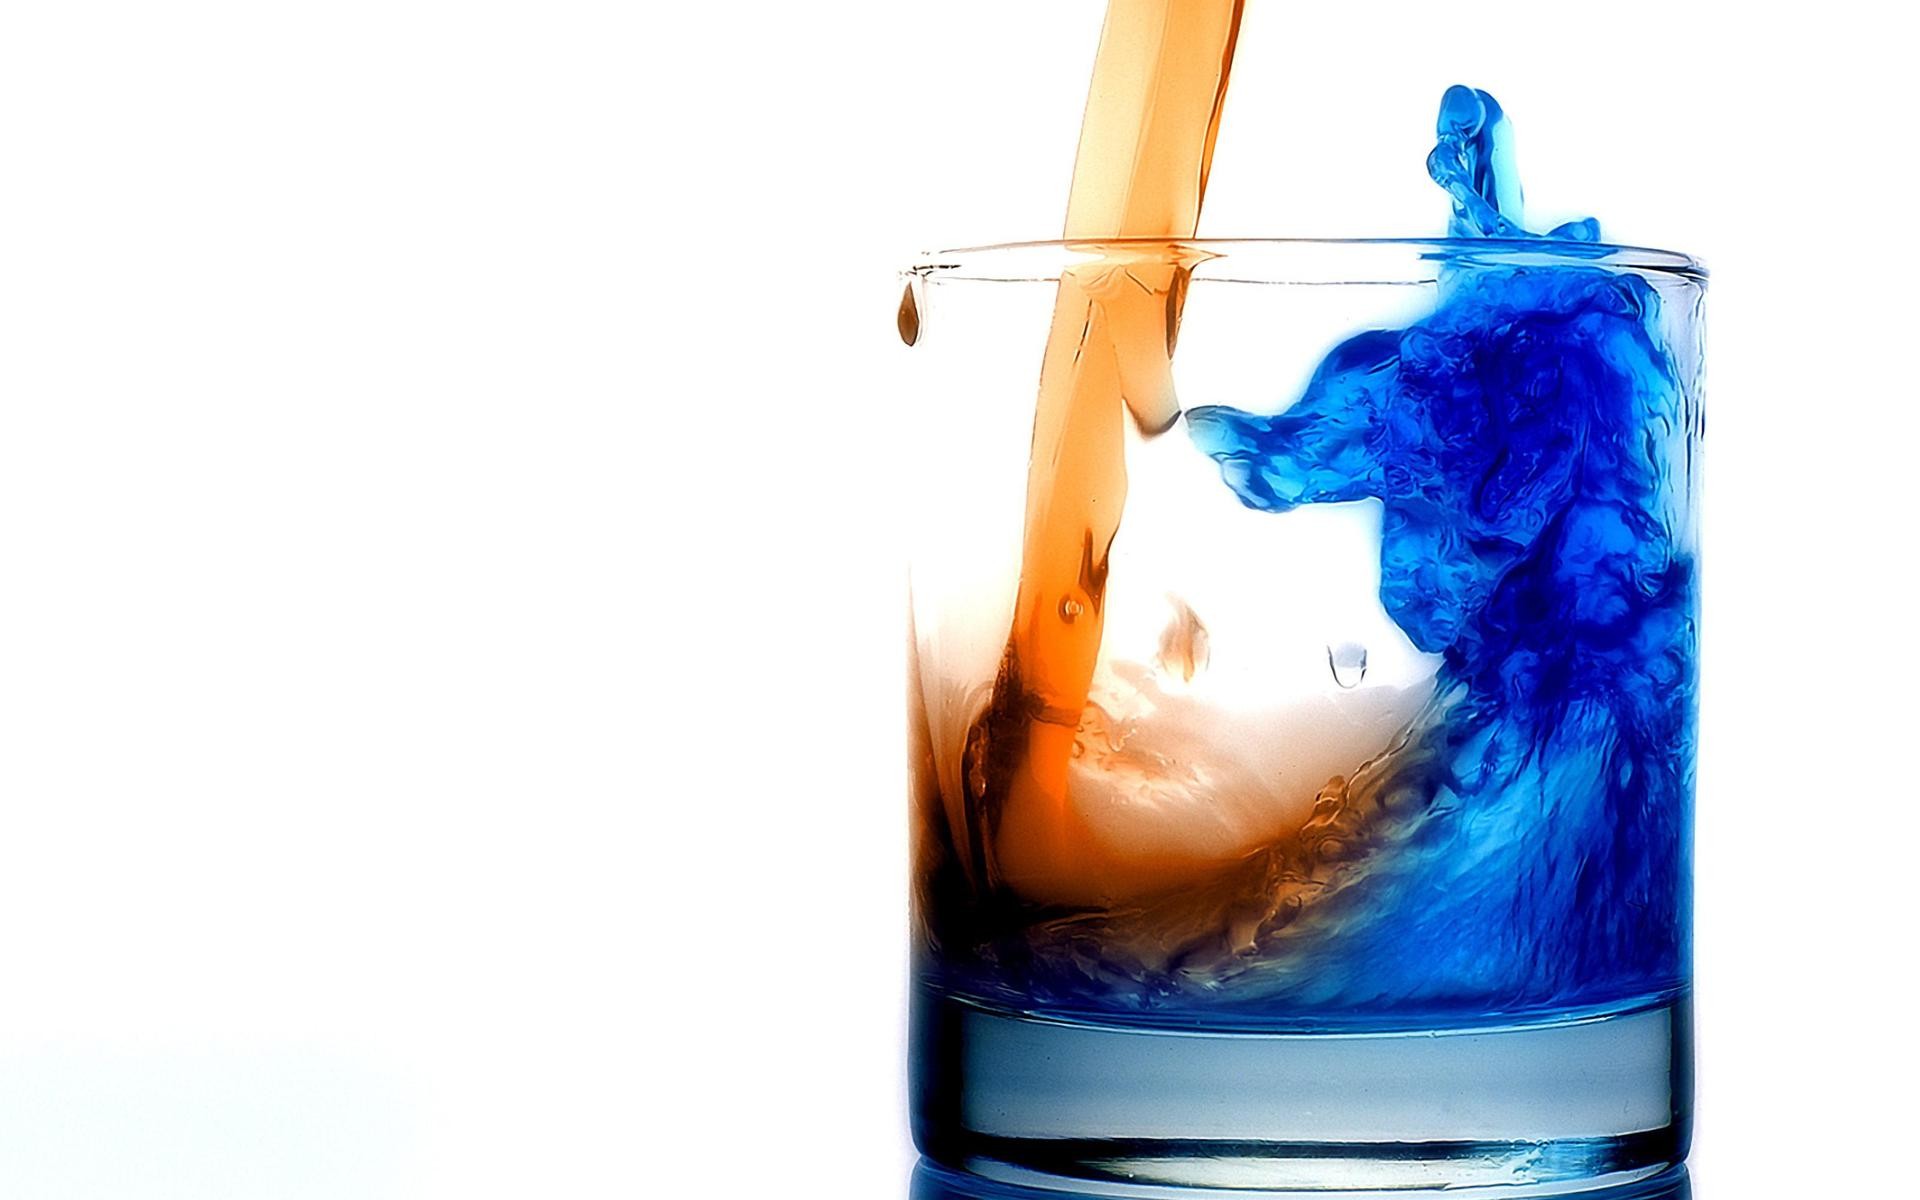 Alcohol Cocktail Glass Art Fresh Image Wallpapers Hd - Energy Drink - HD Wallpaper 